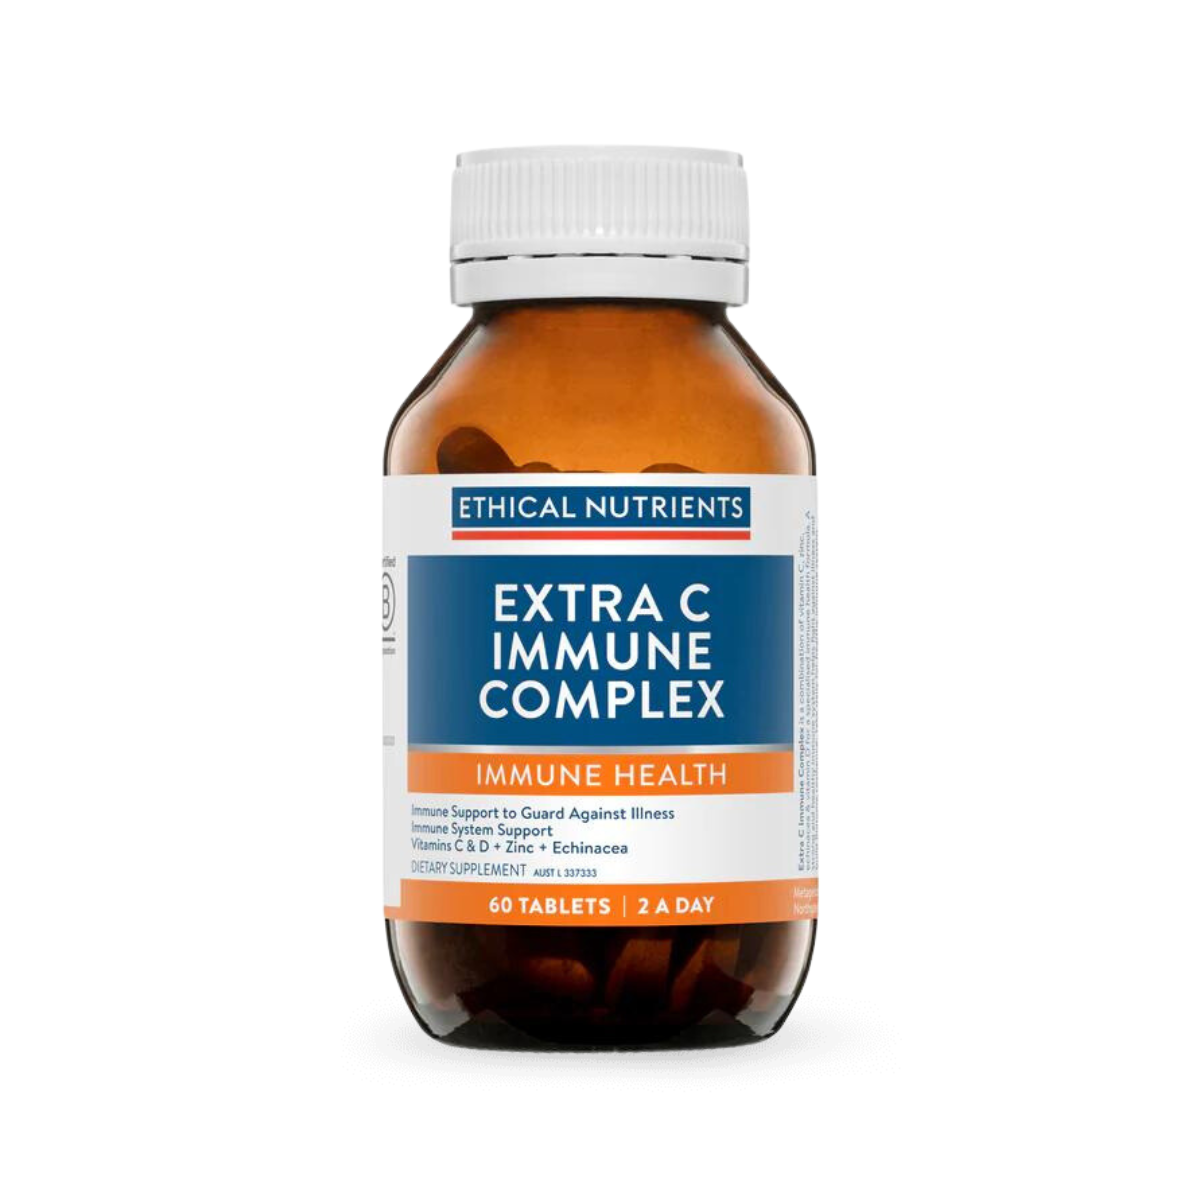 Ethical Nutrients Extra C Immune Complex 60 Tablets 